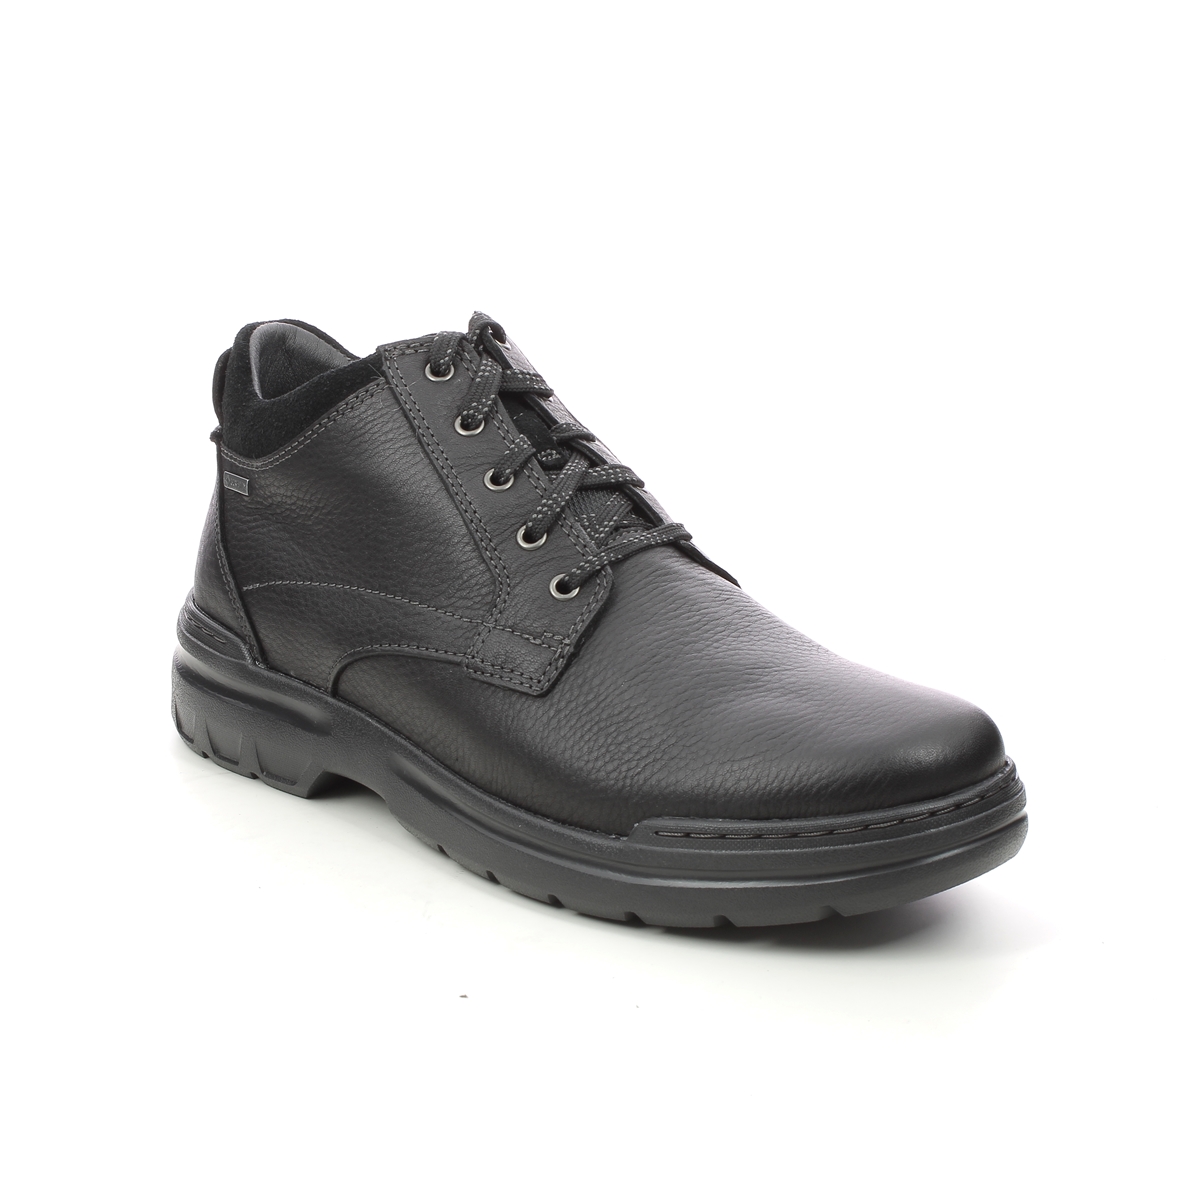 Clarks Rockie 2 Up Gtx Black Leather Mens Boots 612568H In Size 7 In Plain Black Leather H Width Fitting Extra Wide